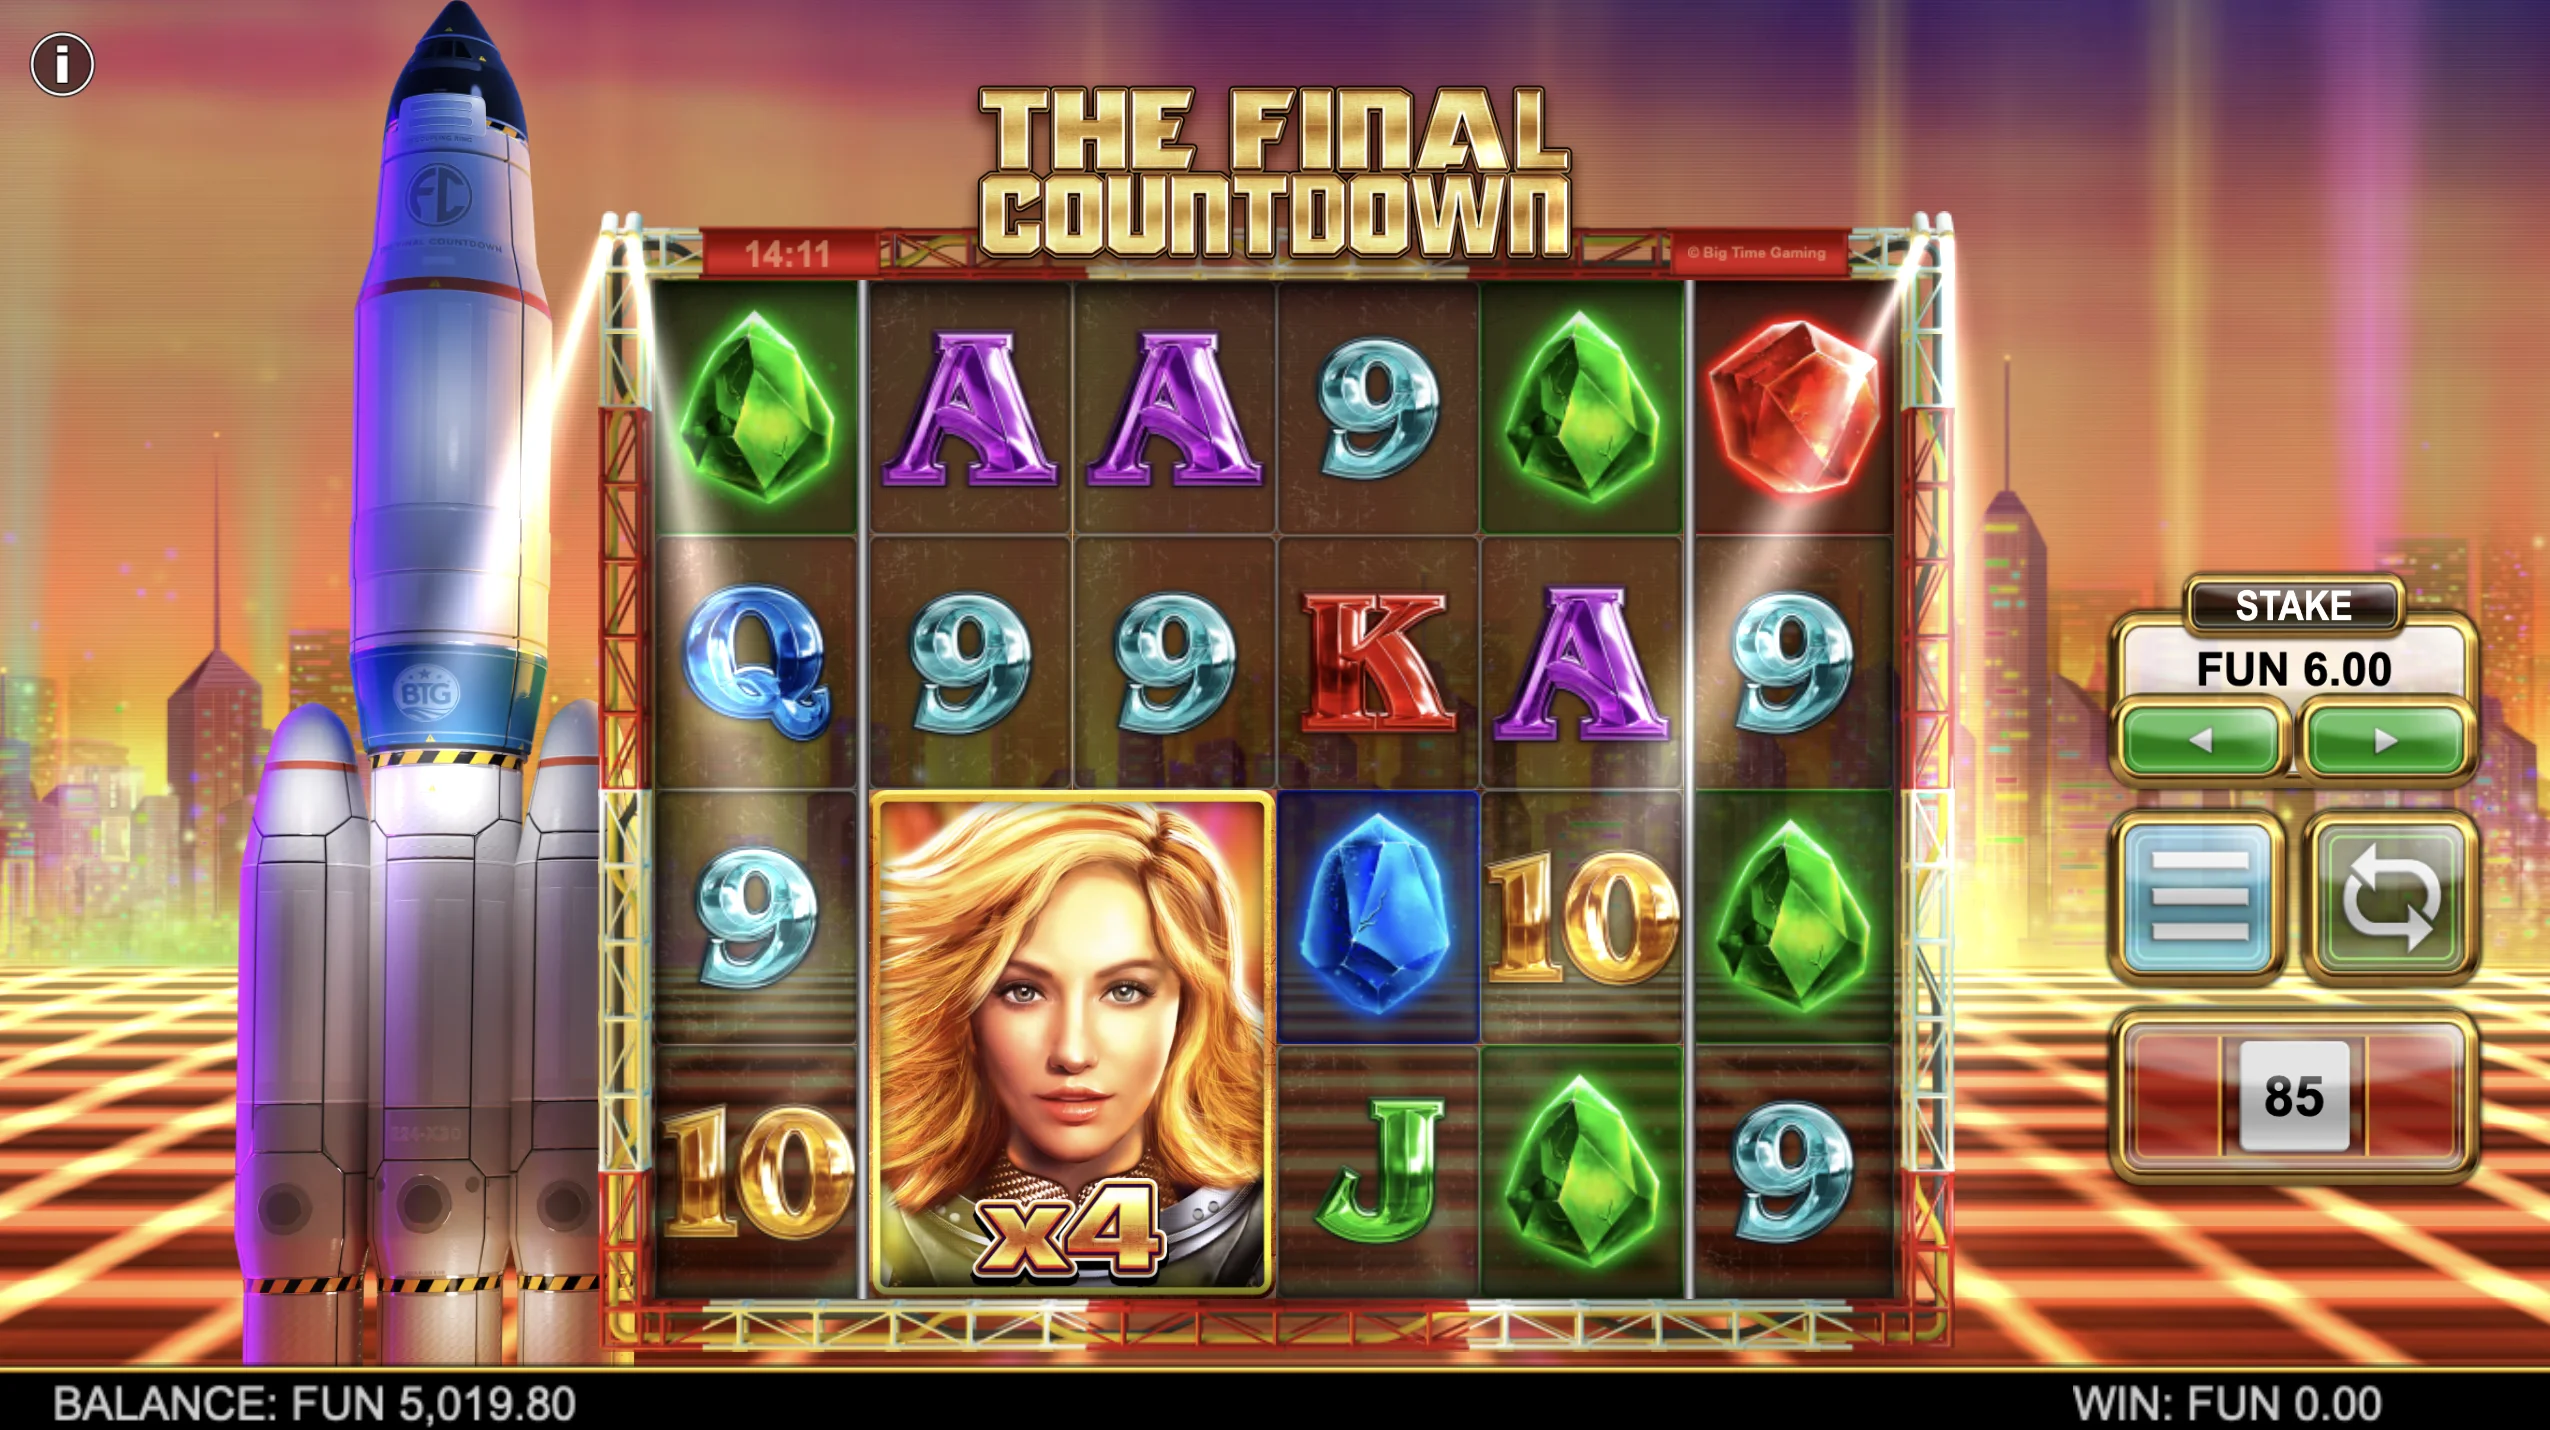 The Final Countdown - Big Time Gaming